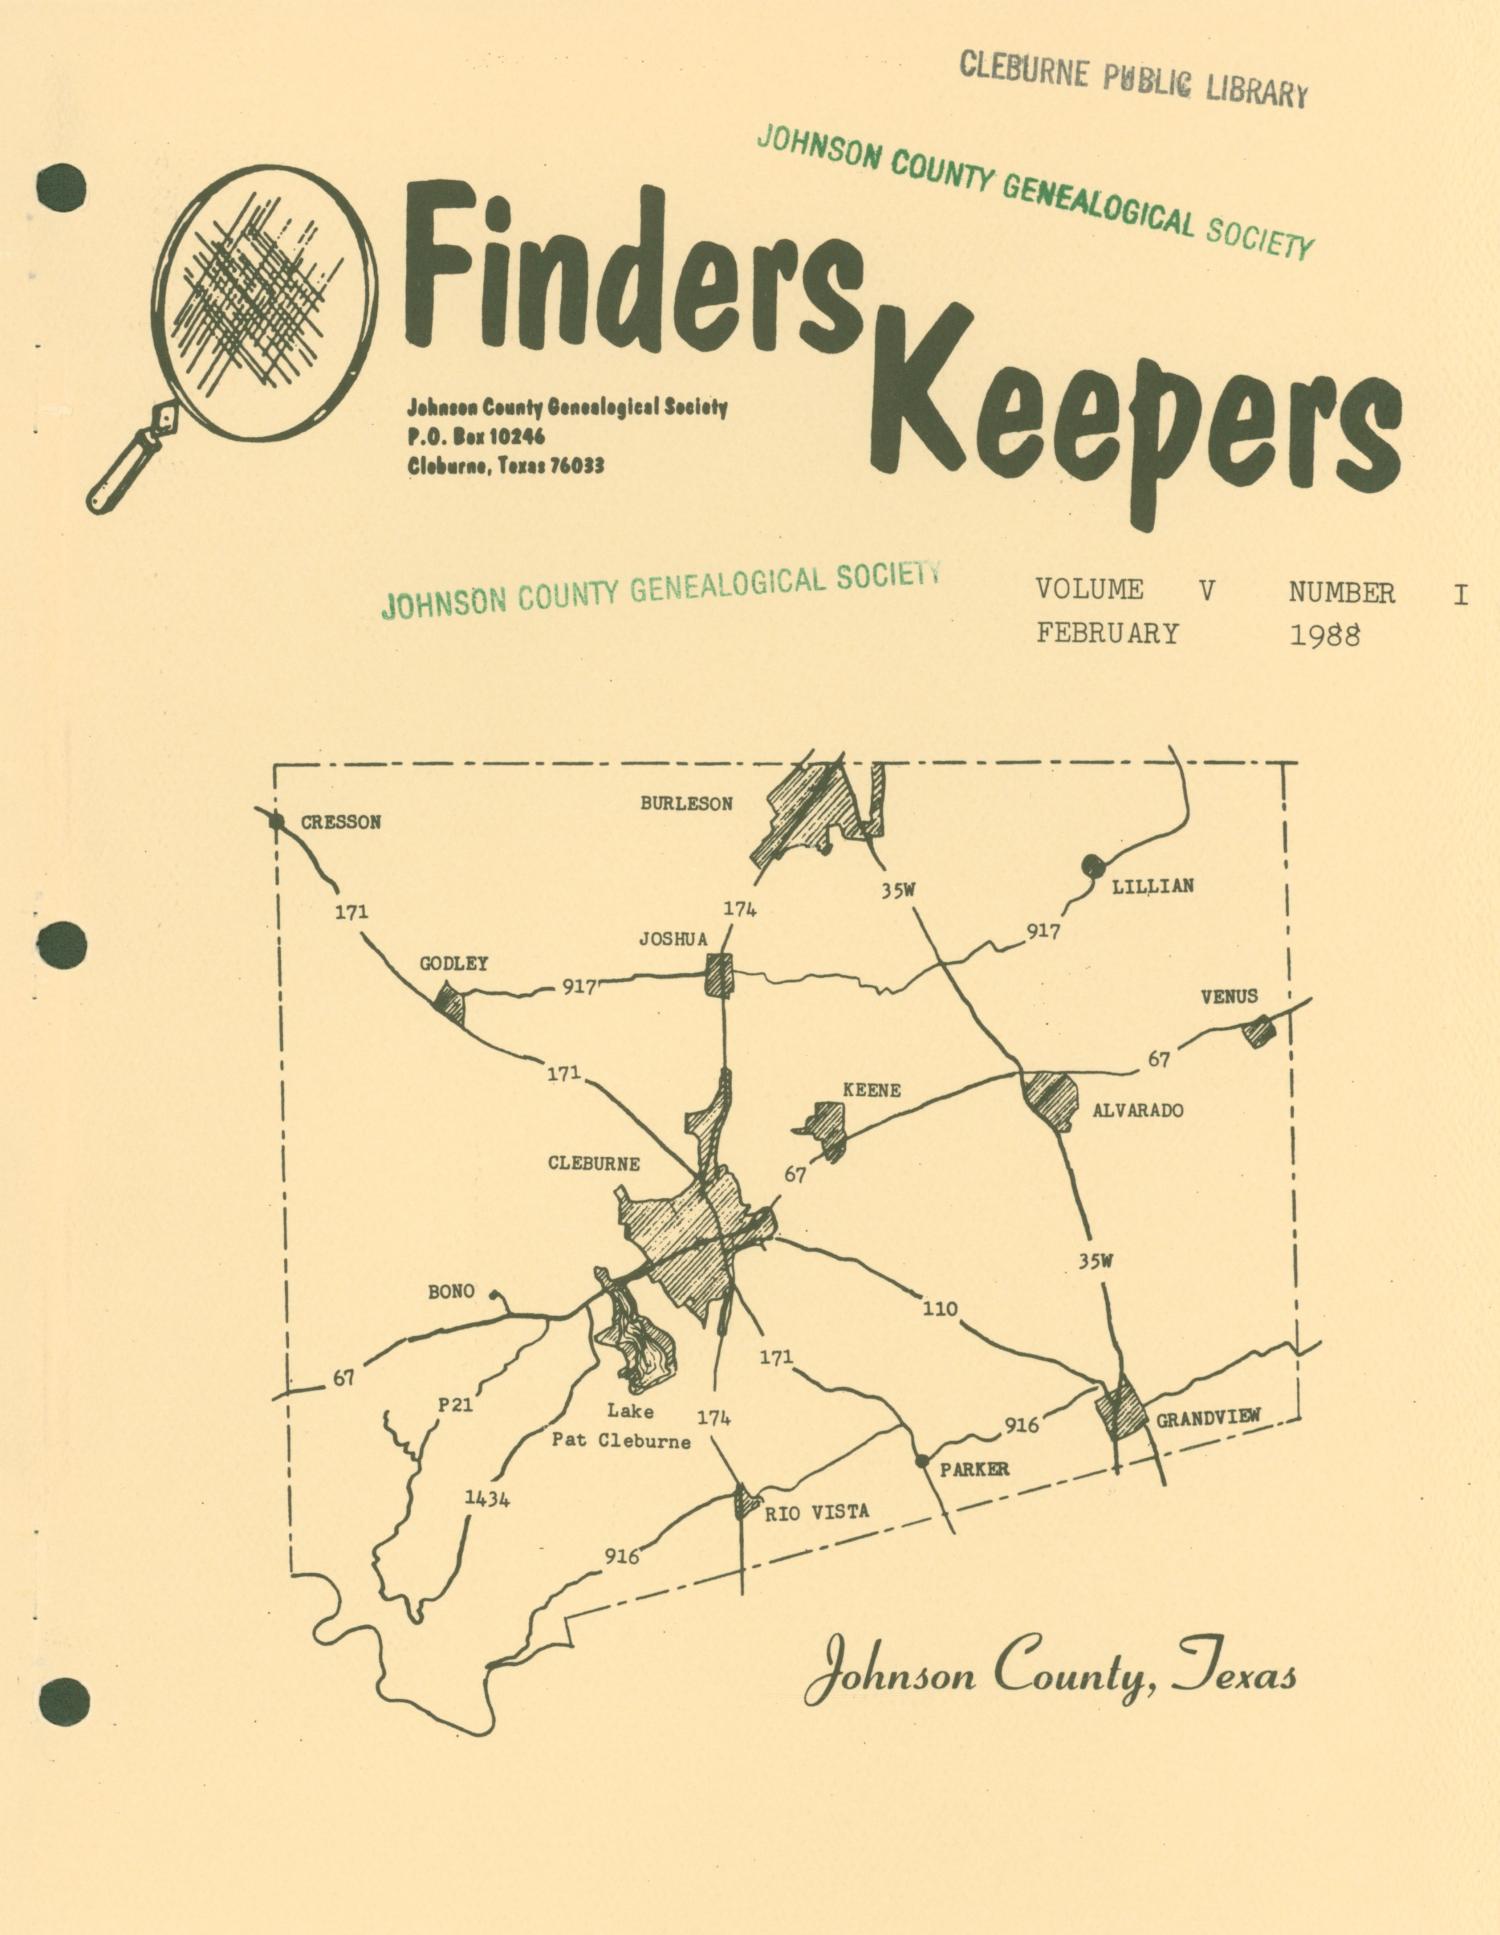 Finders Keepers, Volume 5, Number 1, February 1988
                                                
                                                    Front Cover
                                                